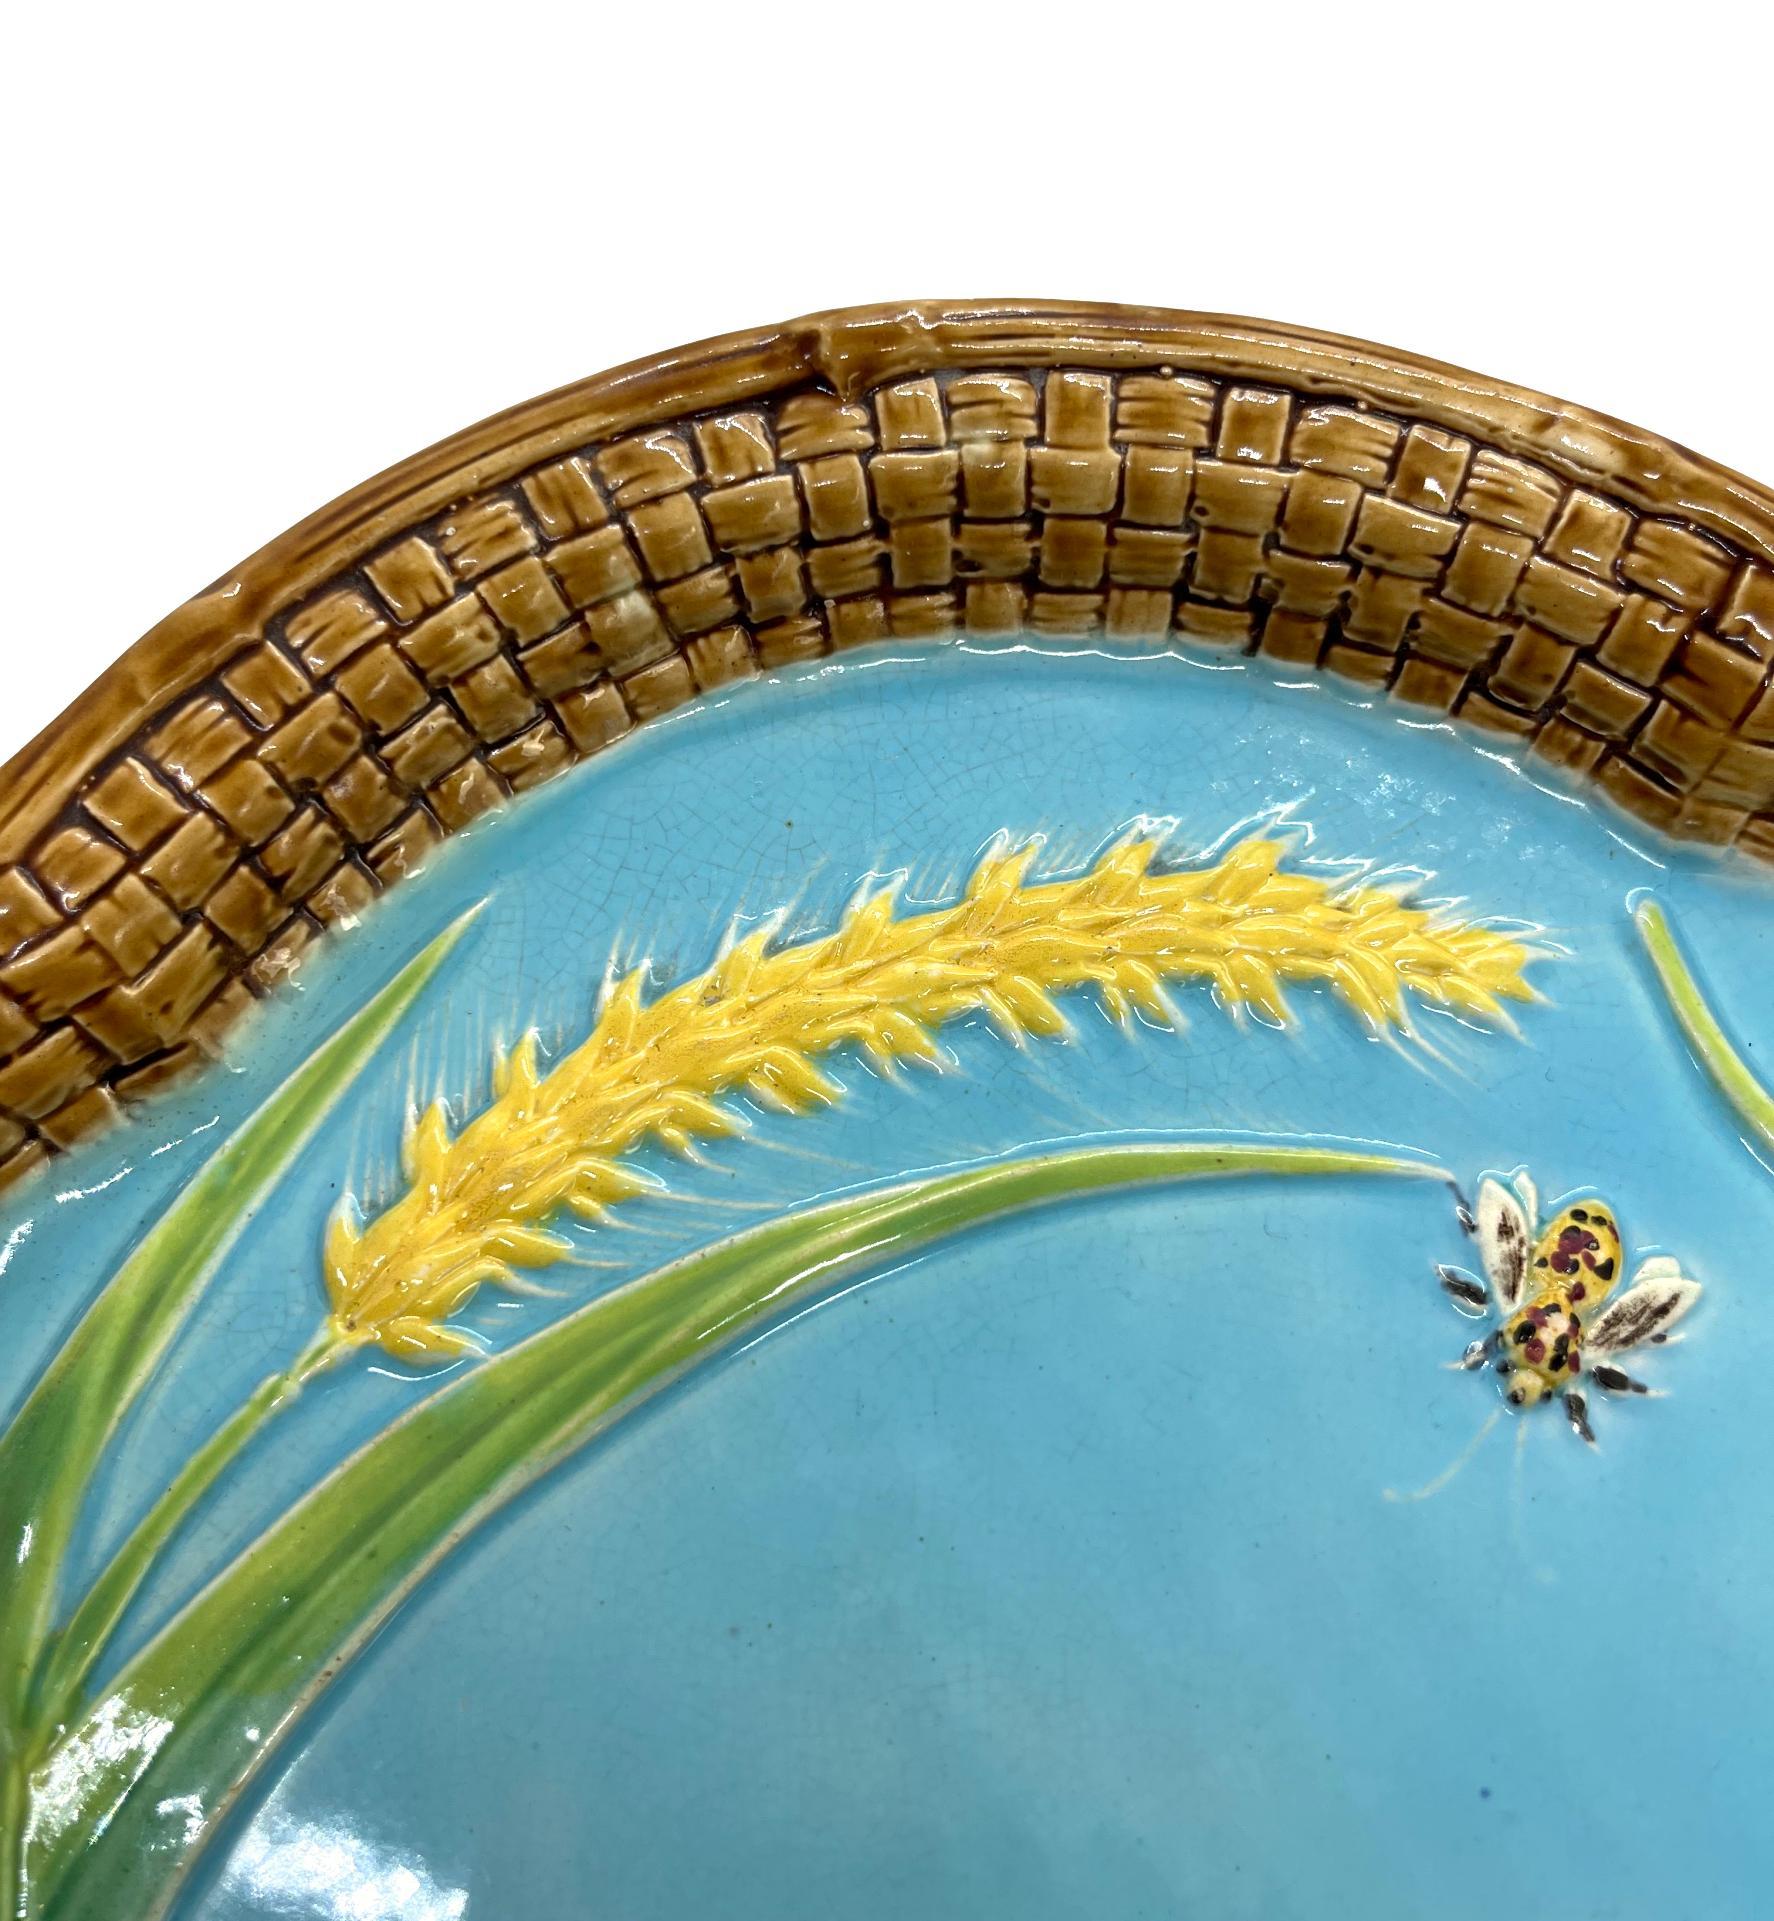 Molded George Jones Majolica Bread Platter, with Butterfly, Bee, and Wheat, Dated 1877